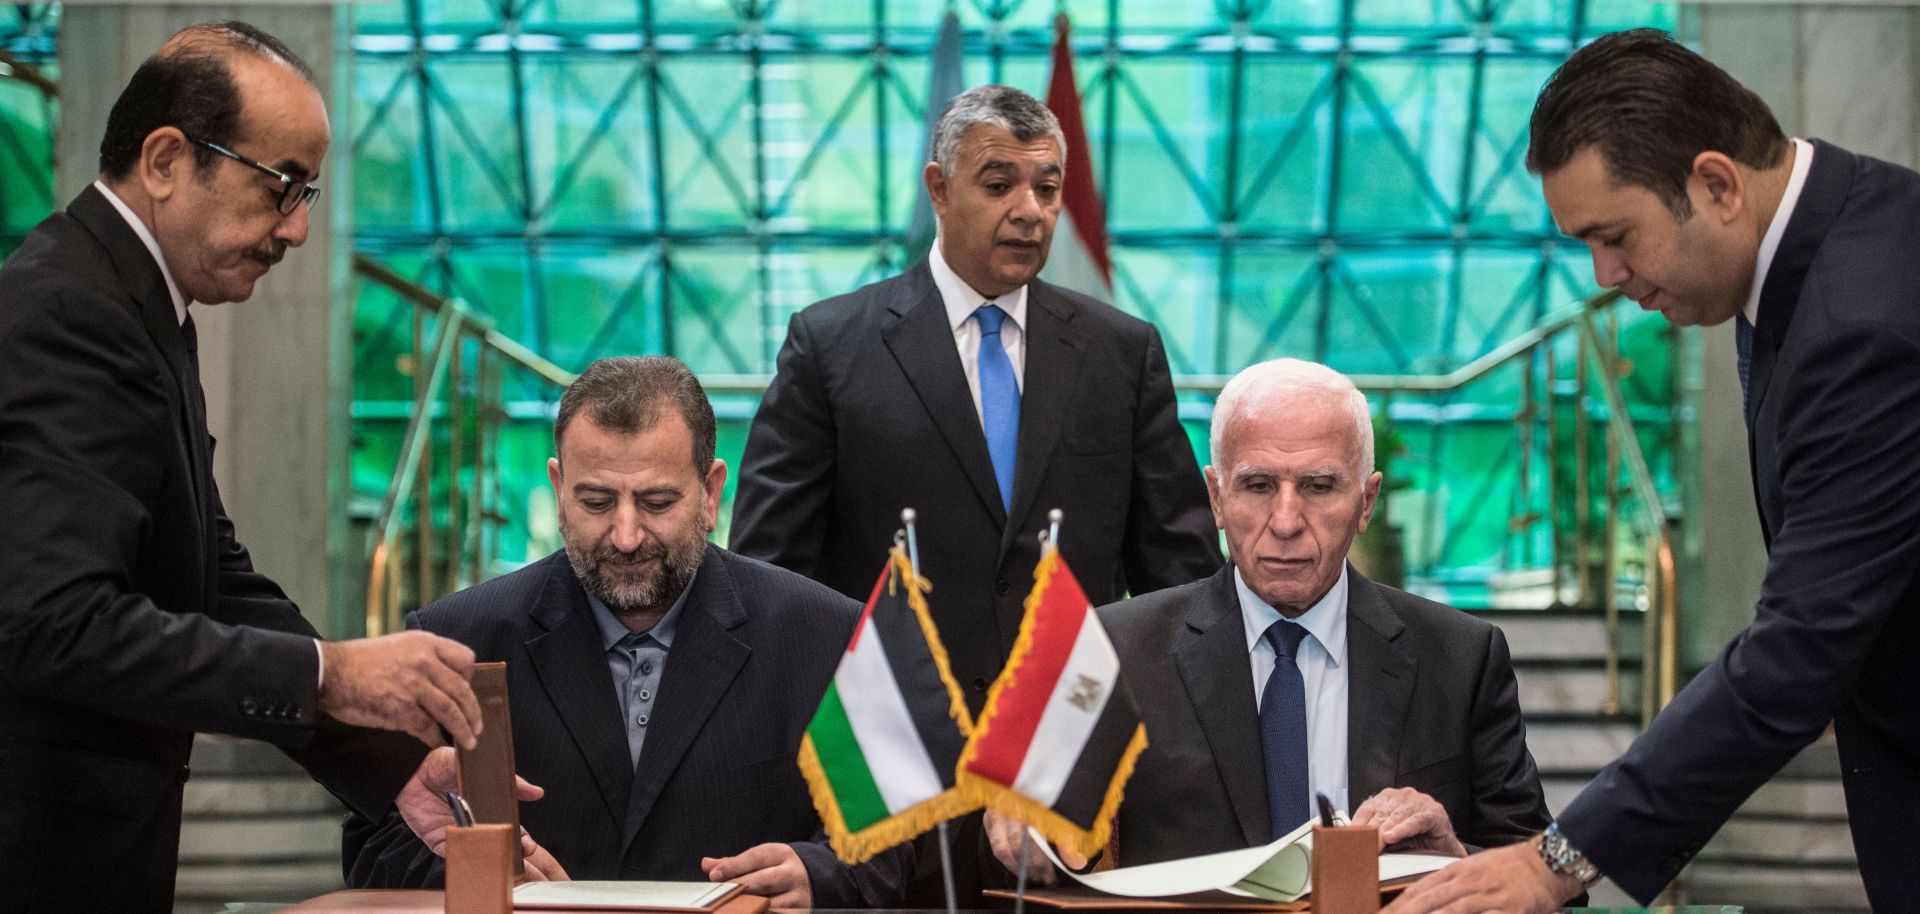 The leaders of Fatah and Hamas sign a reconciliation deal at the Egyptian intelligence services headquarters in Cairo on Oct. 12, ending their decadelong split.